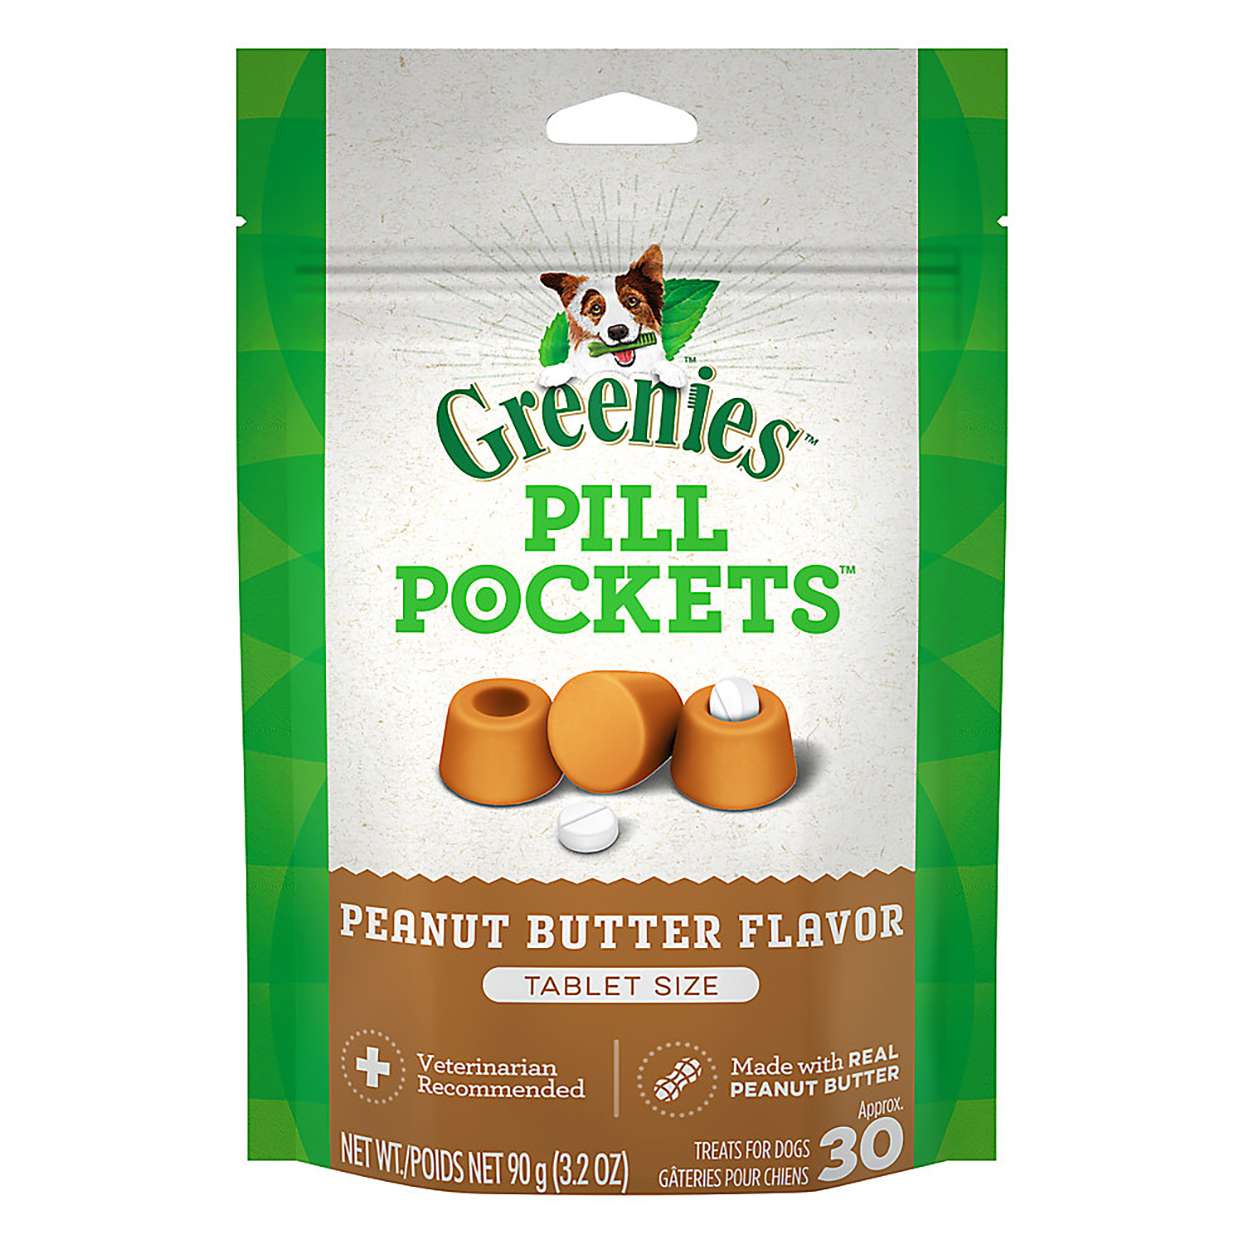 Bag of Greenies Peanut Butter Pill Pockets on a white background